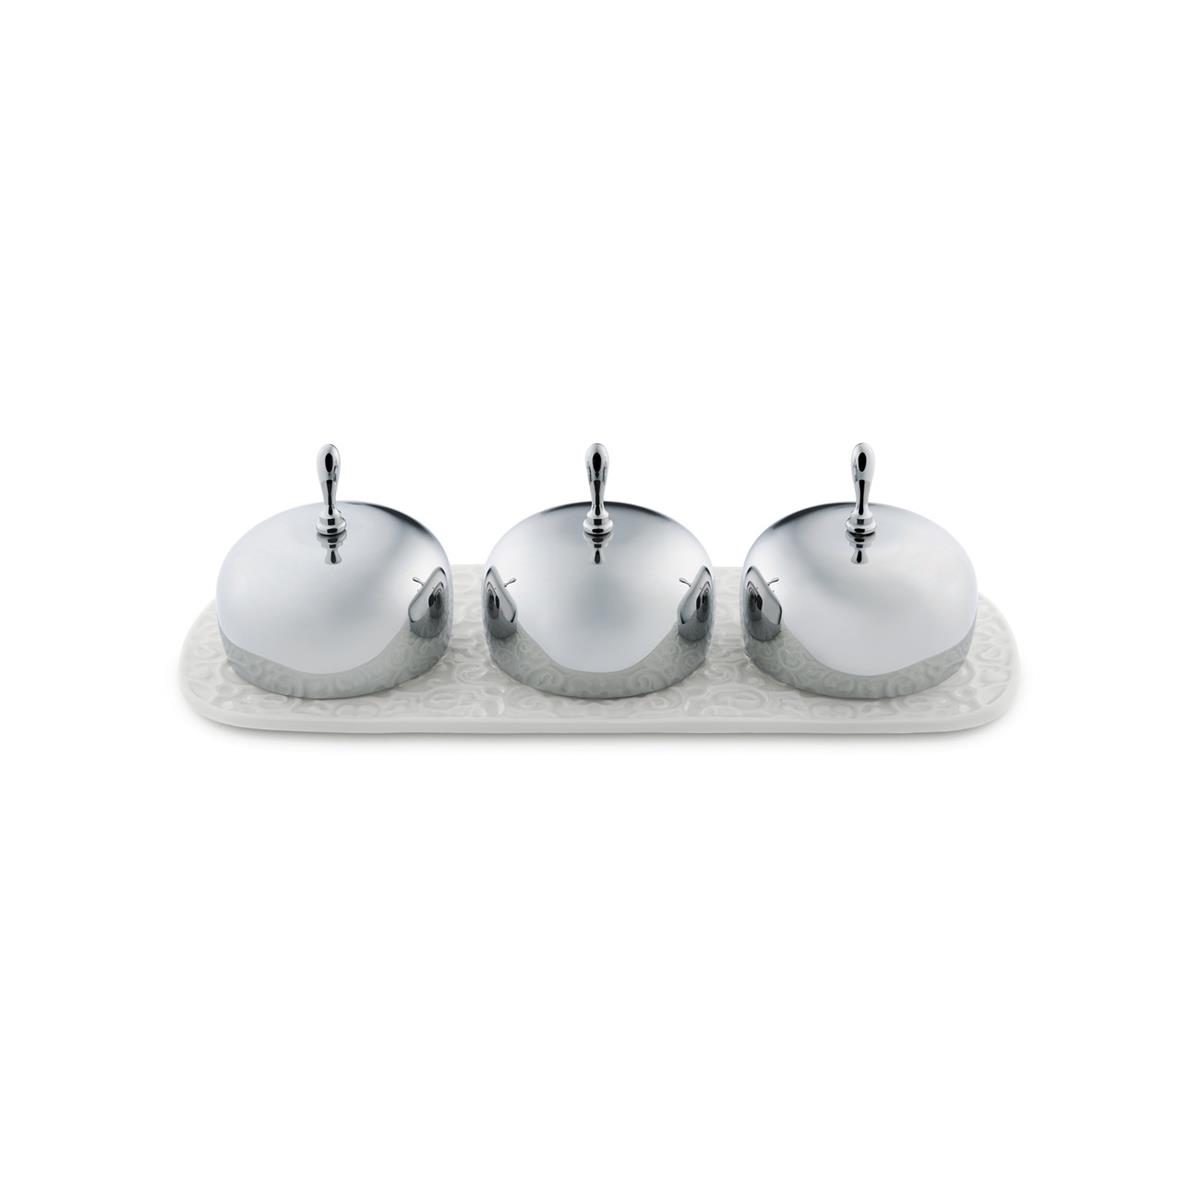 Alessi-Dressed Porcelain jam bowl with 18/10 stainless steel lids